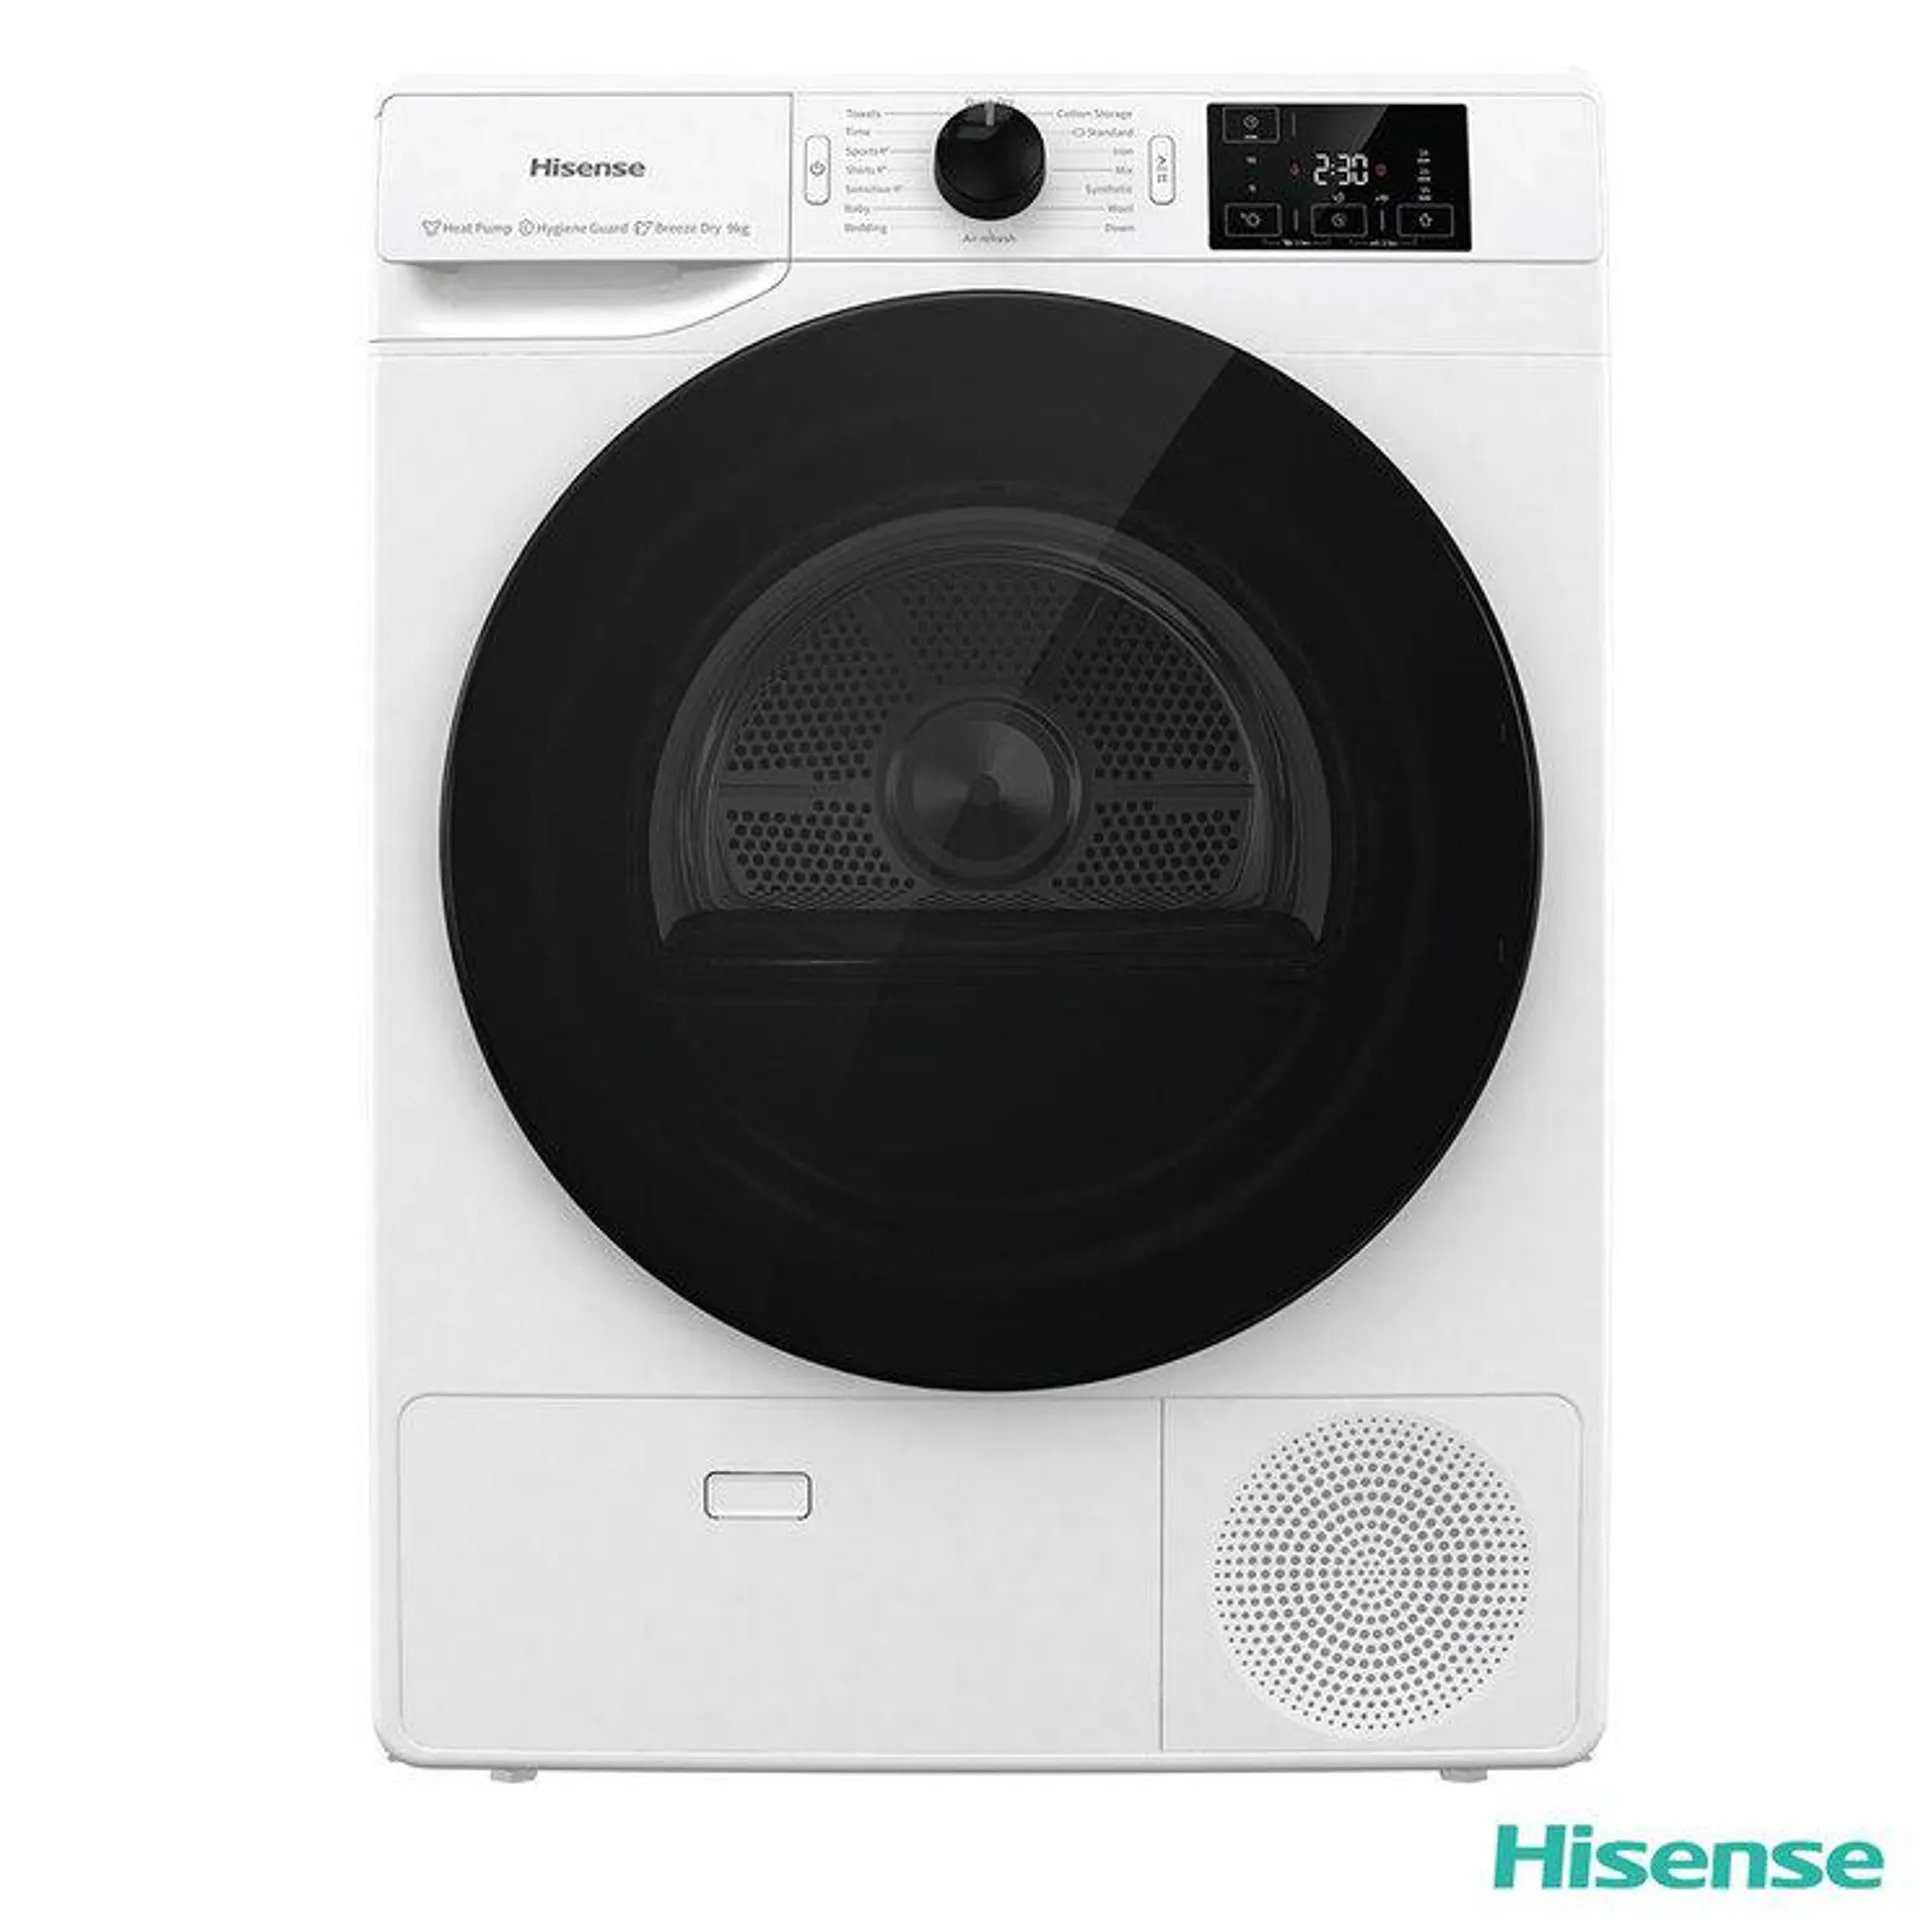 Hisense DHGE904, 9kg, Heat Pump Dryer, A Rated in White